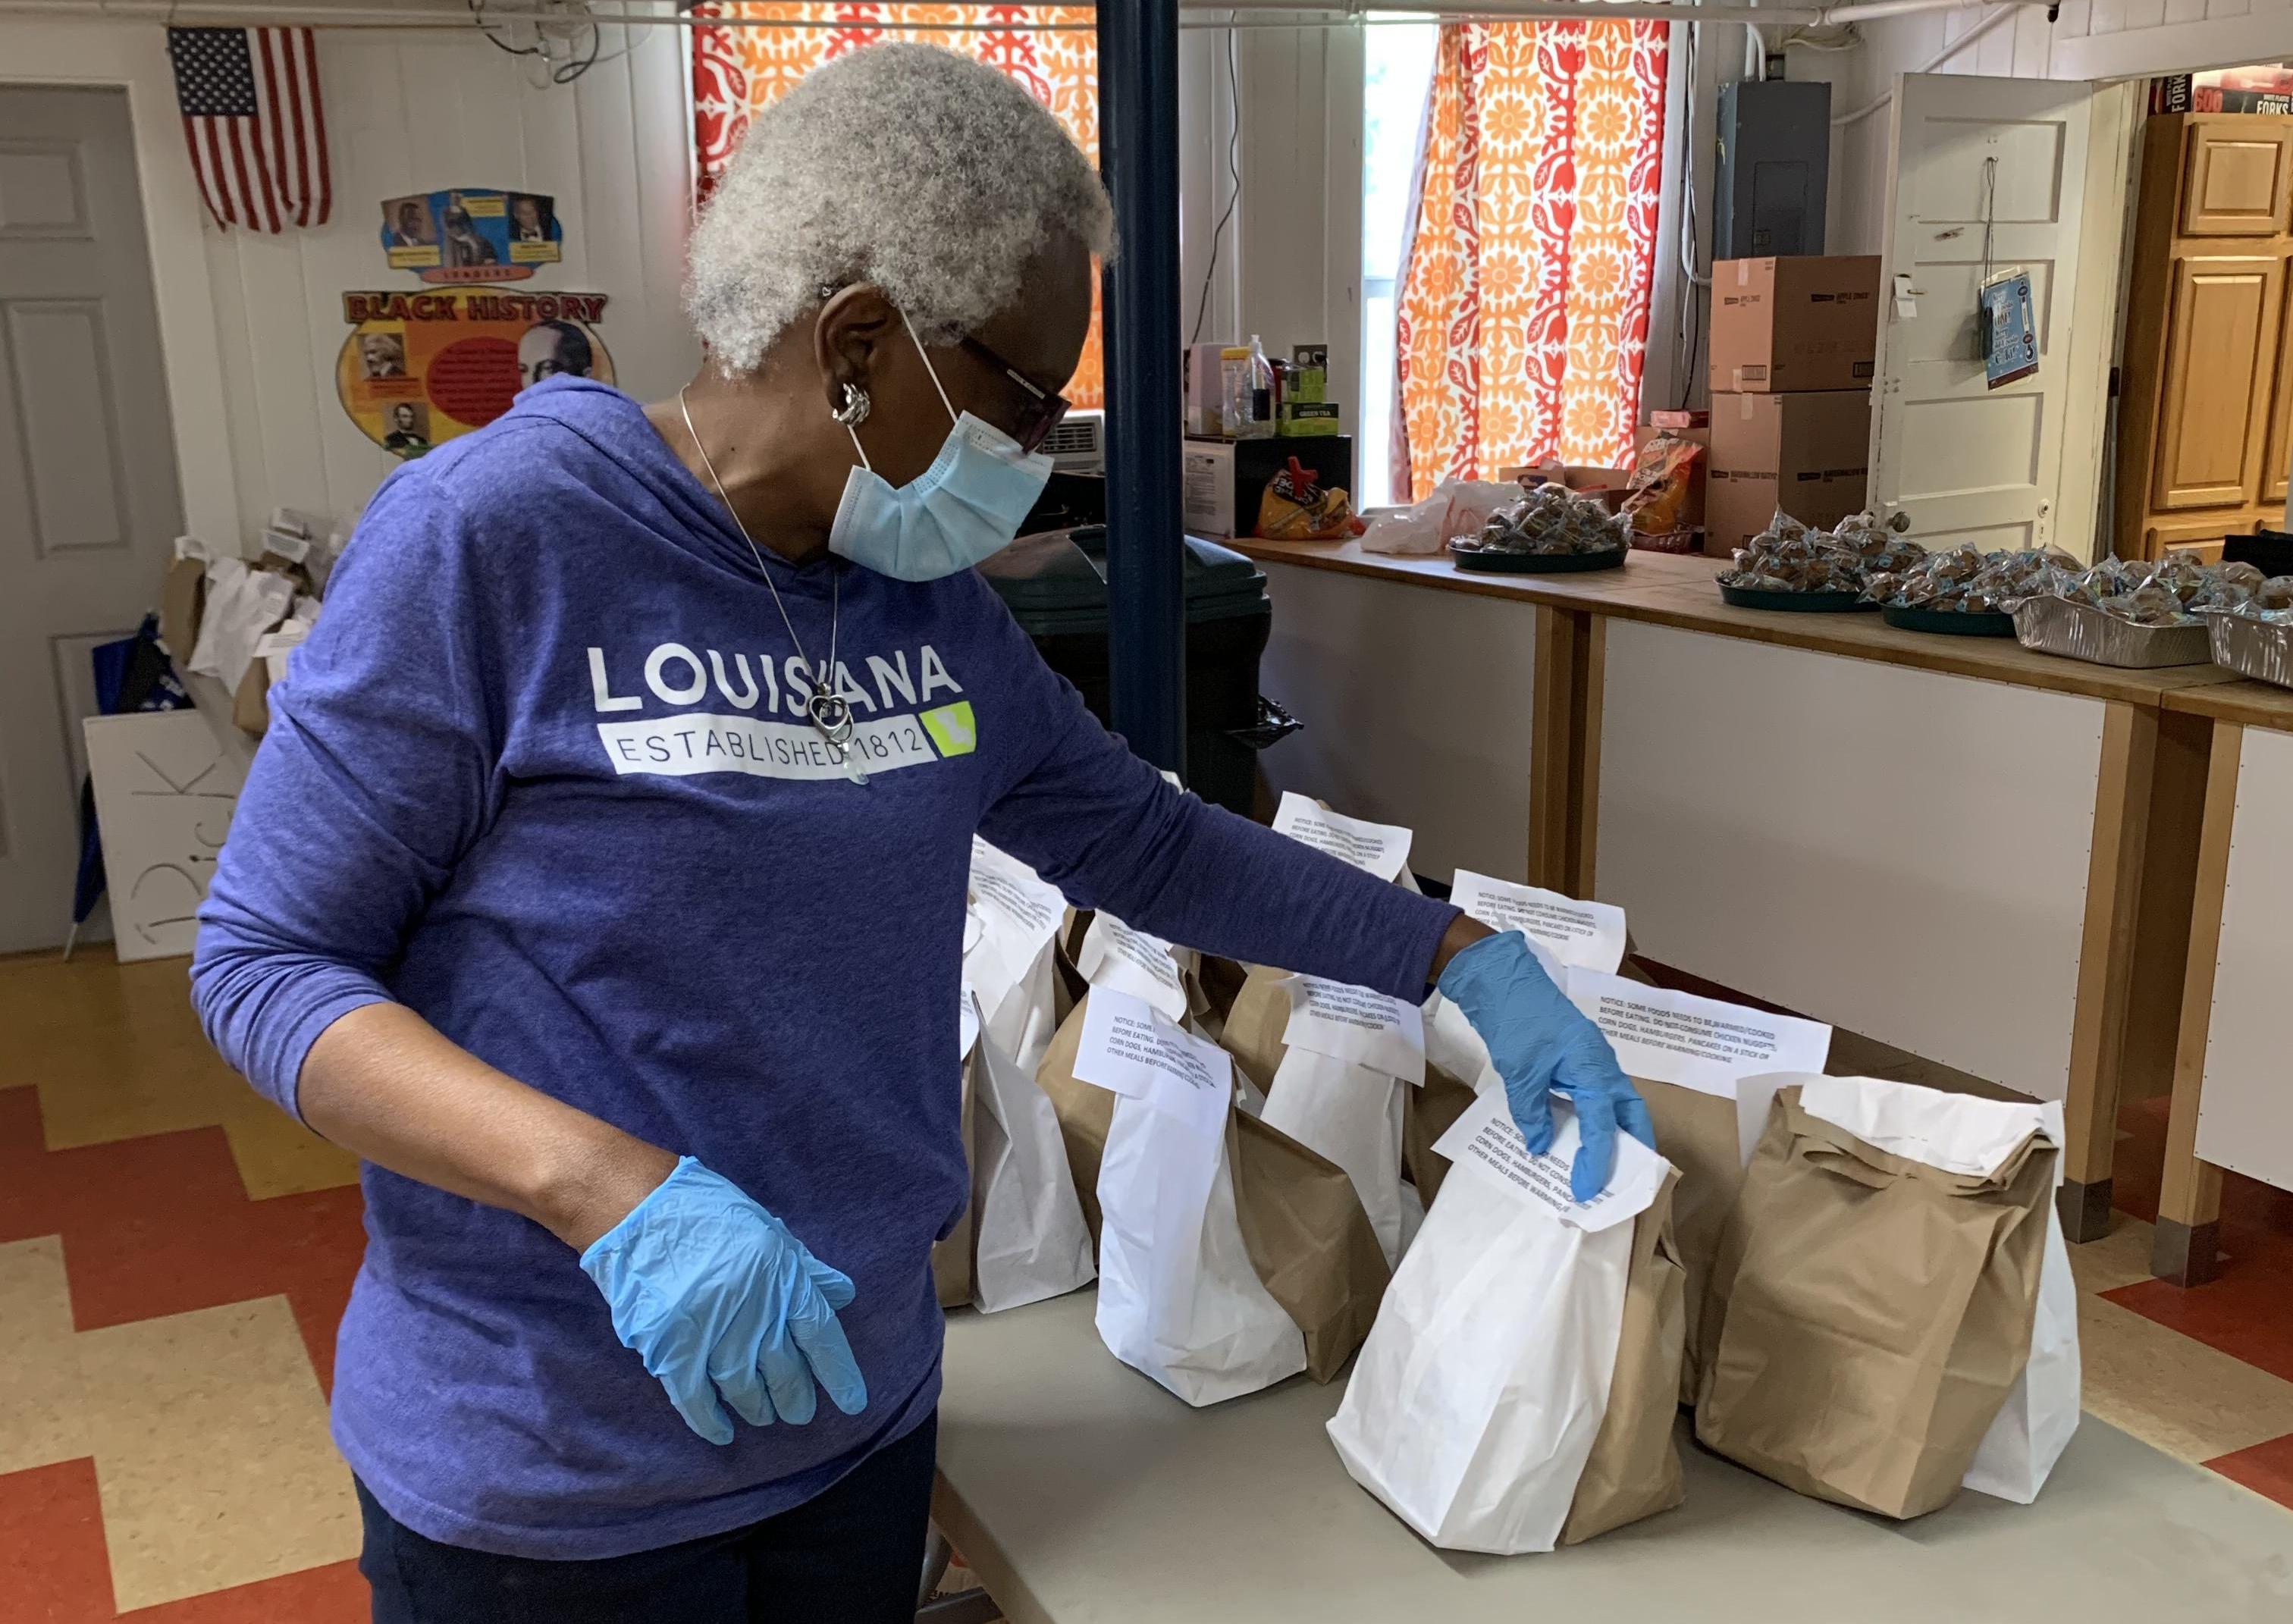 Volunteers at the Thensted Center in Grand Coteau, Louisiana, prepare sack lunches for children in the area during the COVIS-19 pandemic